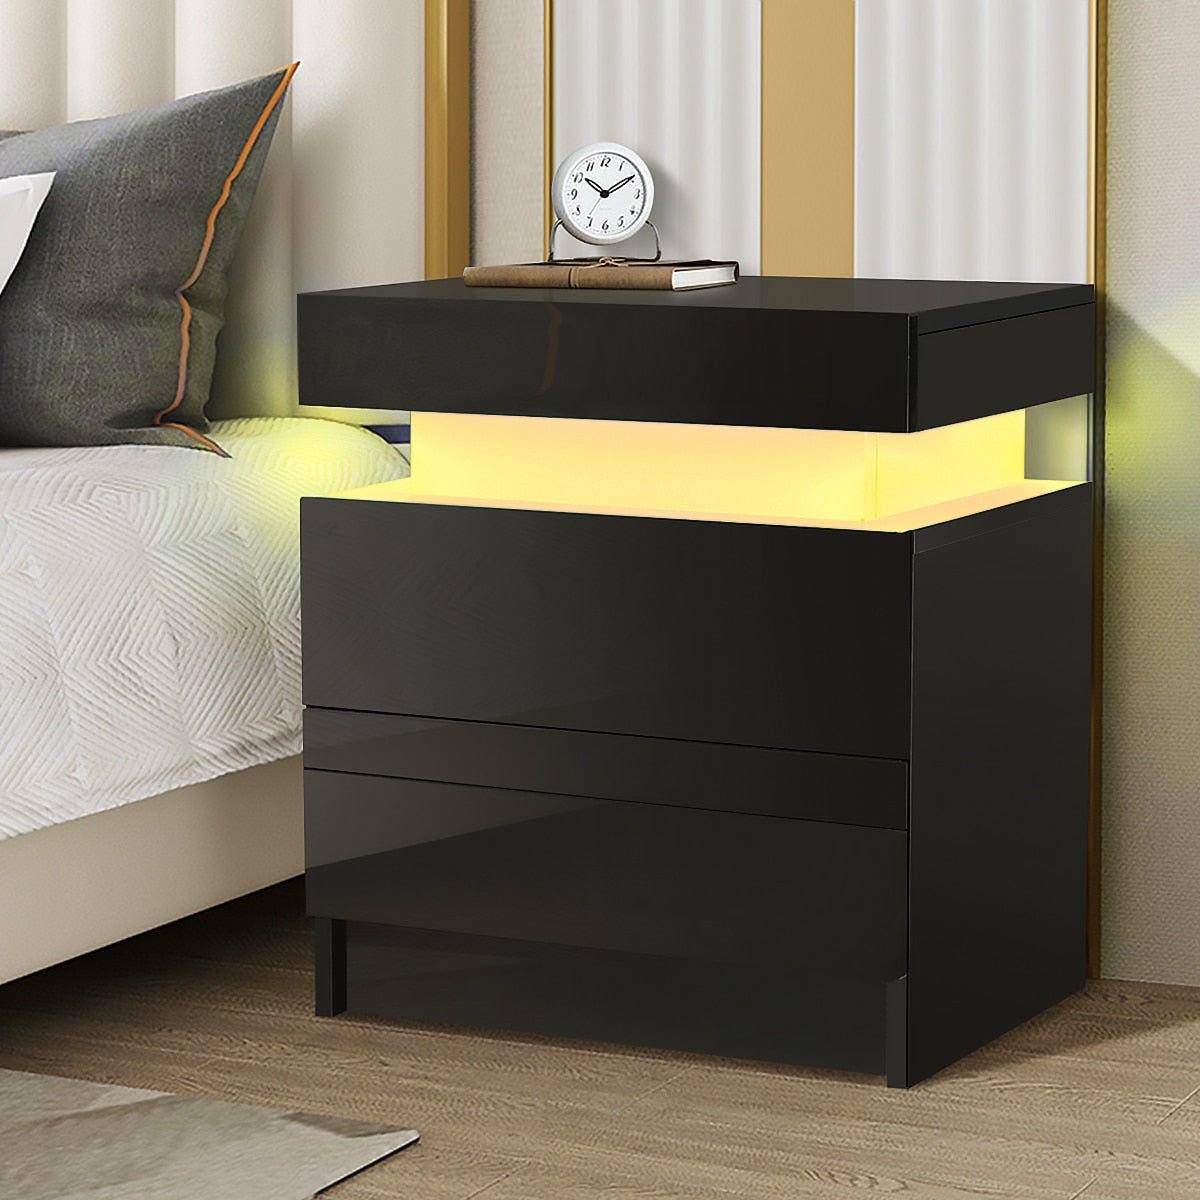 LED Bedside Nightstand And Coffee Table